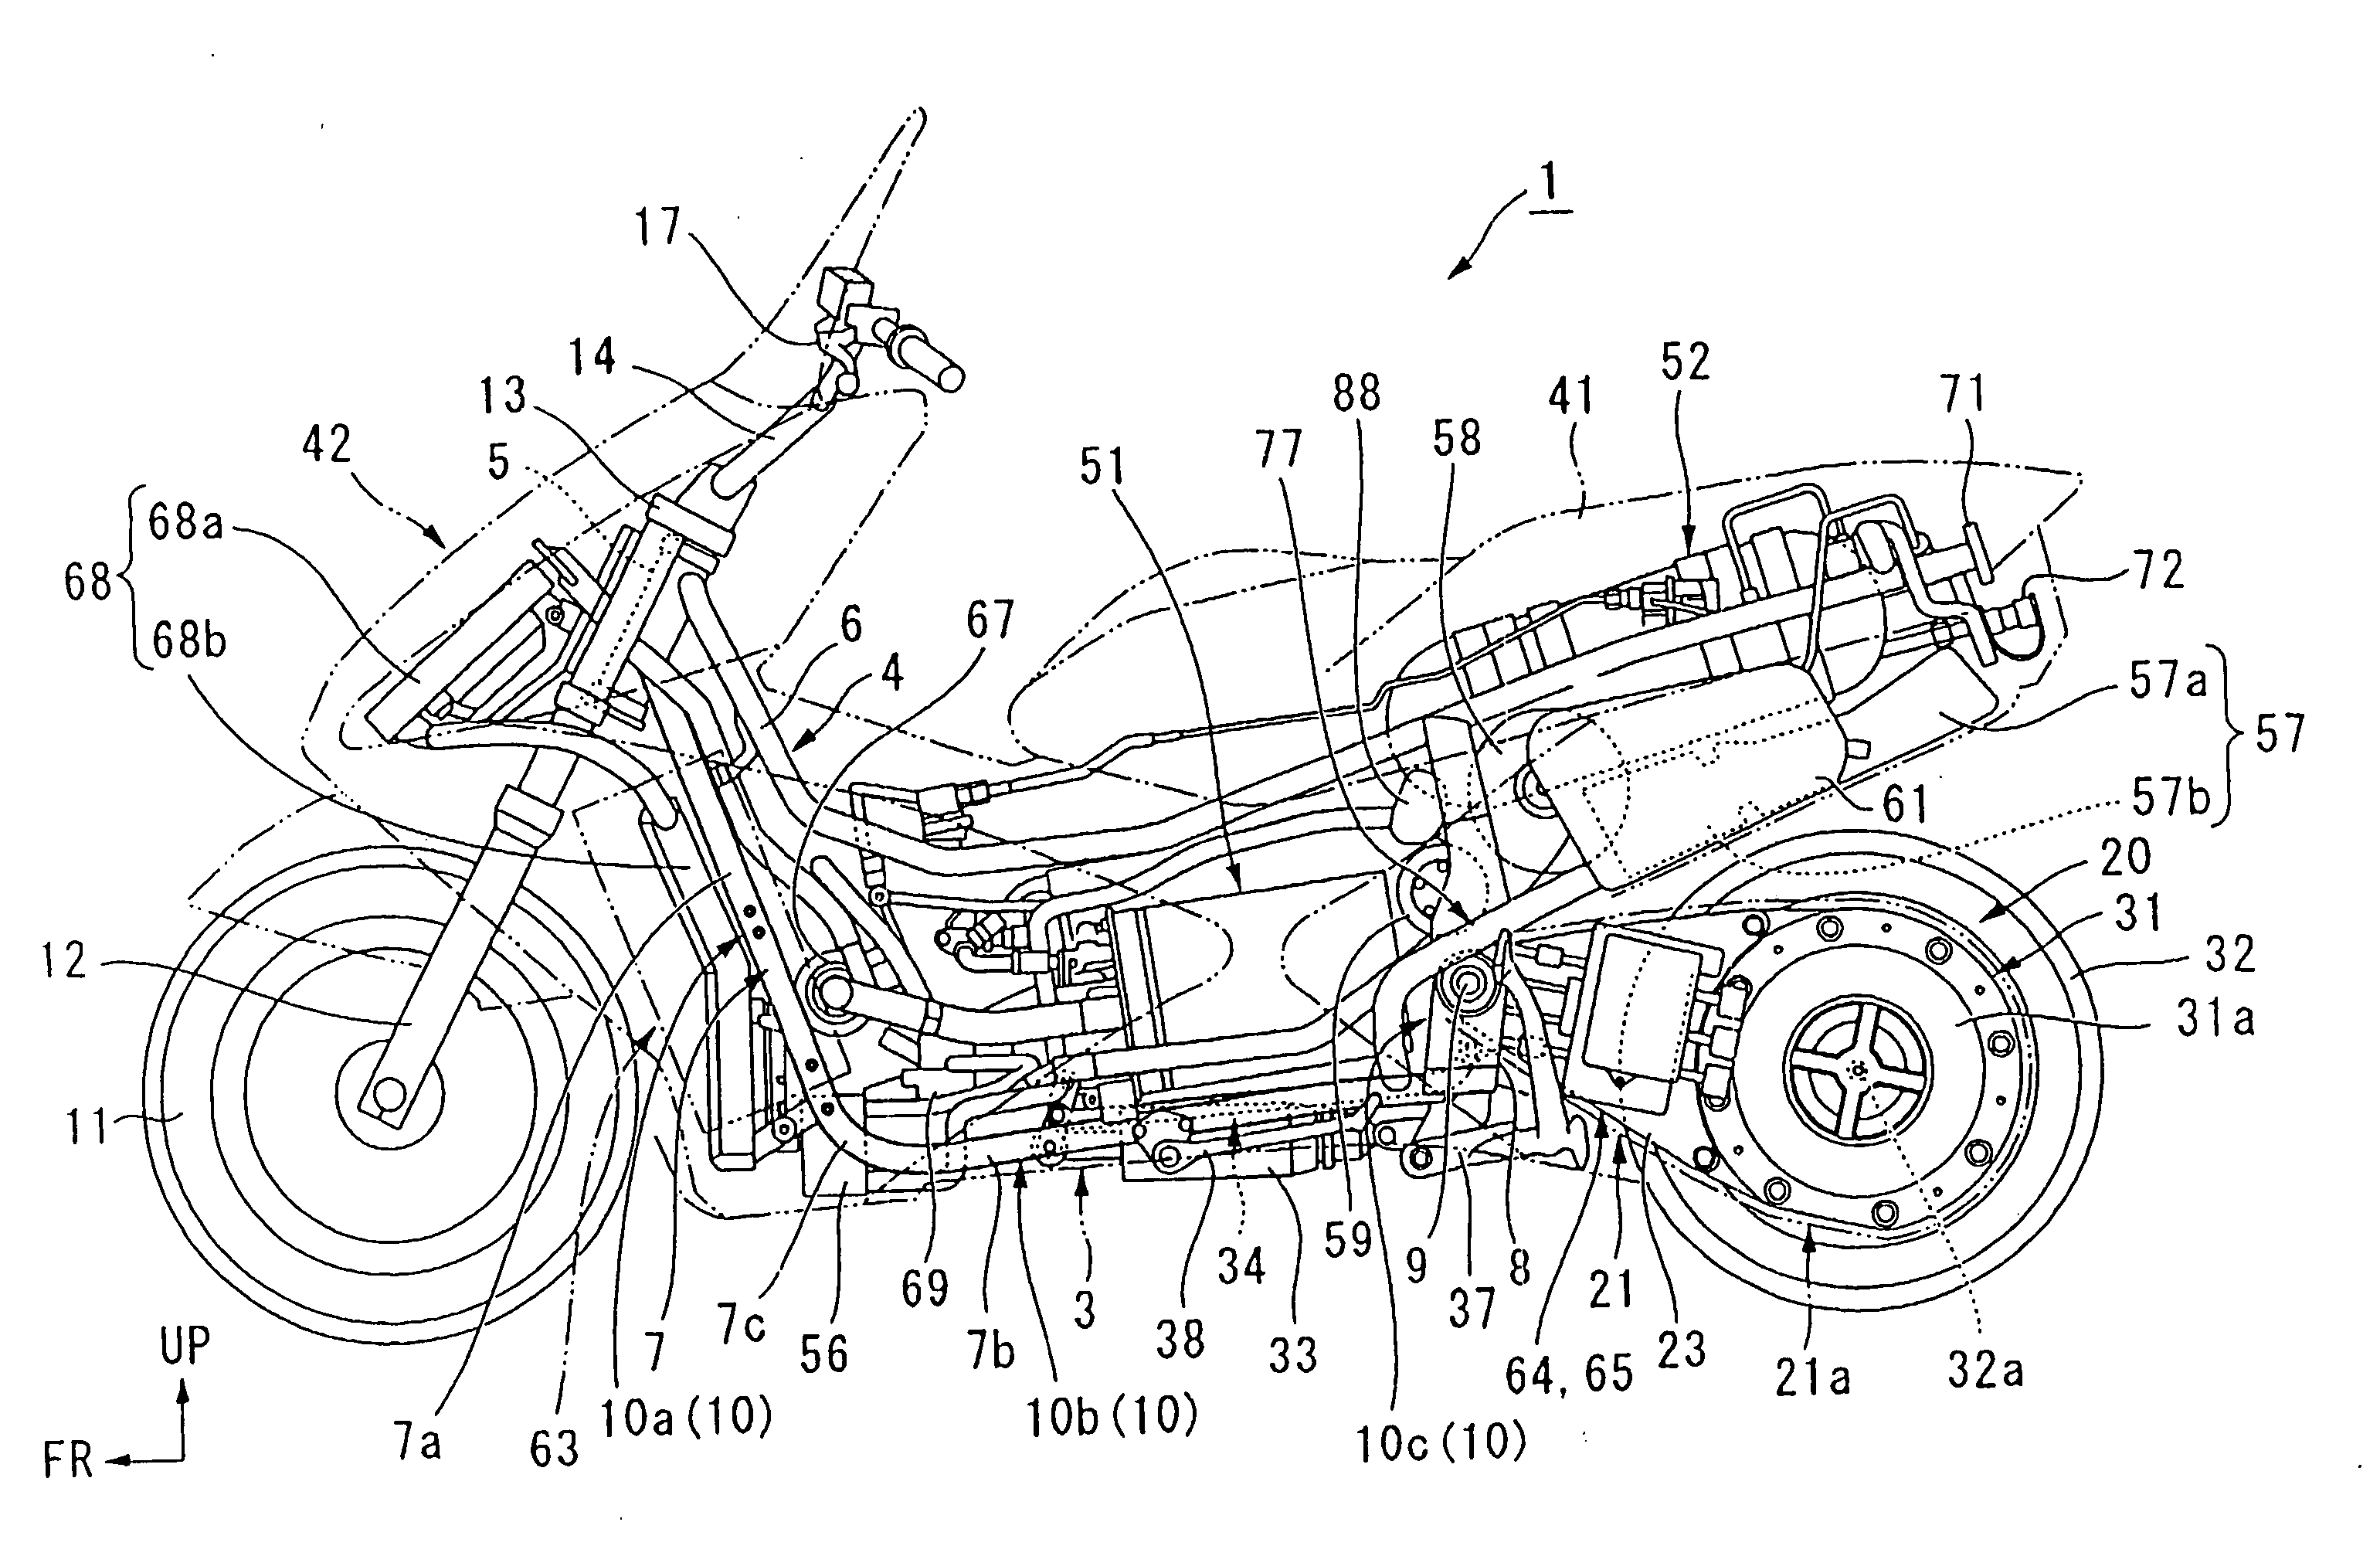 Intake structure in fuel cell powered vehicle, and motorcycle with fuel cell mounted thereon